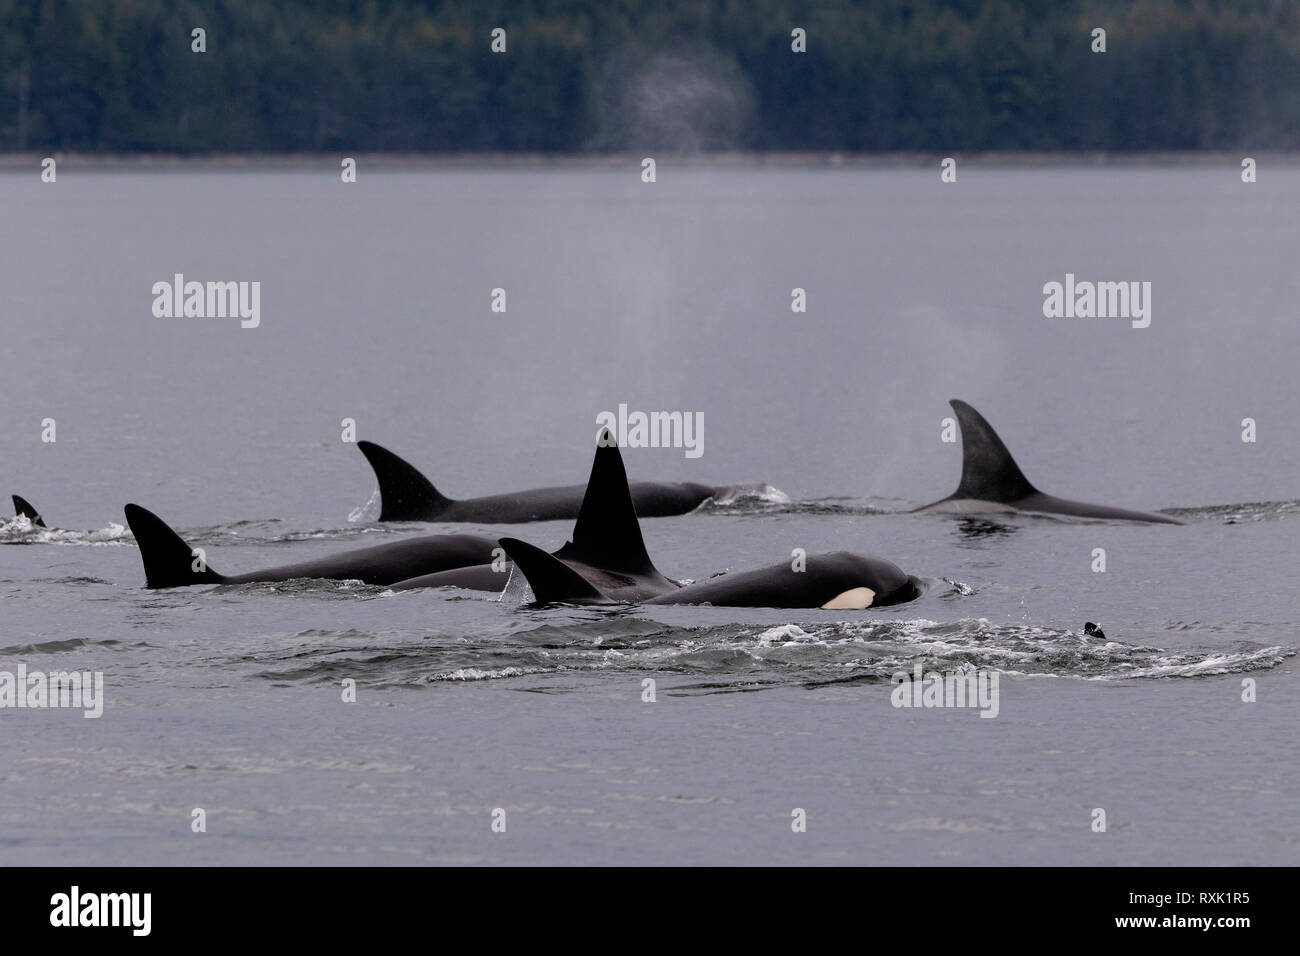 Northern resident orca whale pod (killer whales, Orcinus orca) travelling through Johnstone Strait close to the Vancouver Island shoreline on a late afternoon, First Nations Territory, Vancouver Island, British Columbia, Canada. Stock Photo